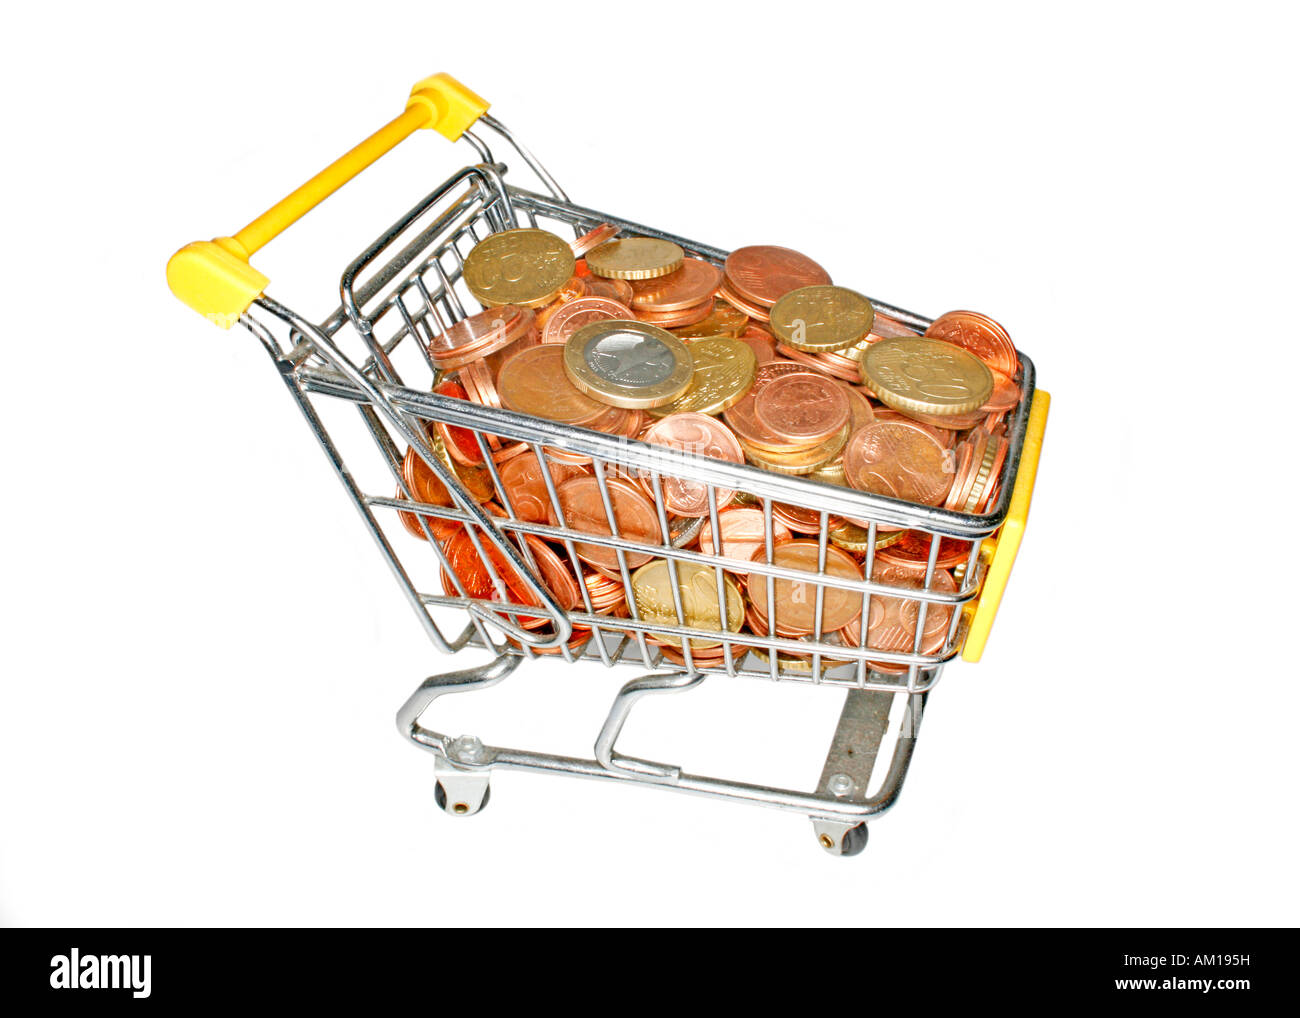 Small shopping-cart filled with coins Stock Photo